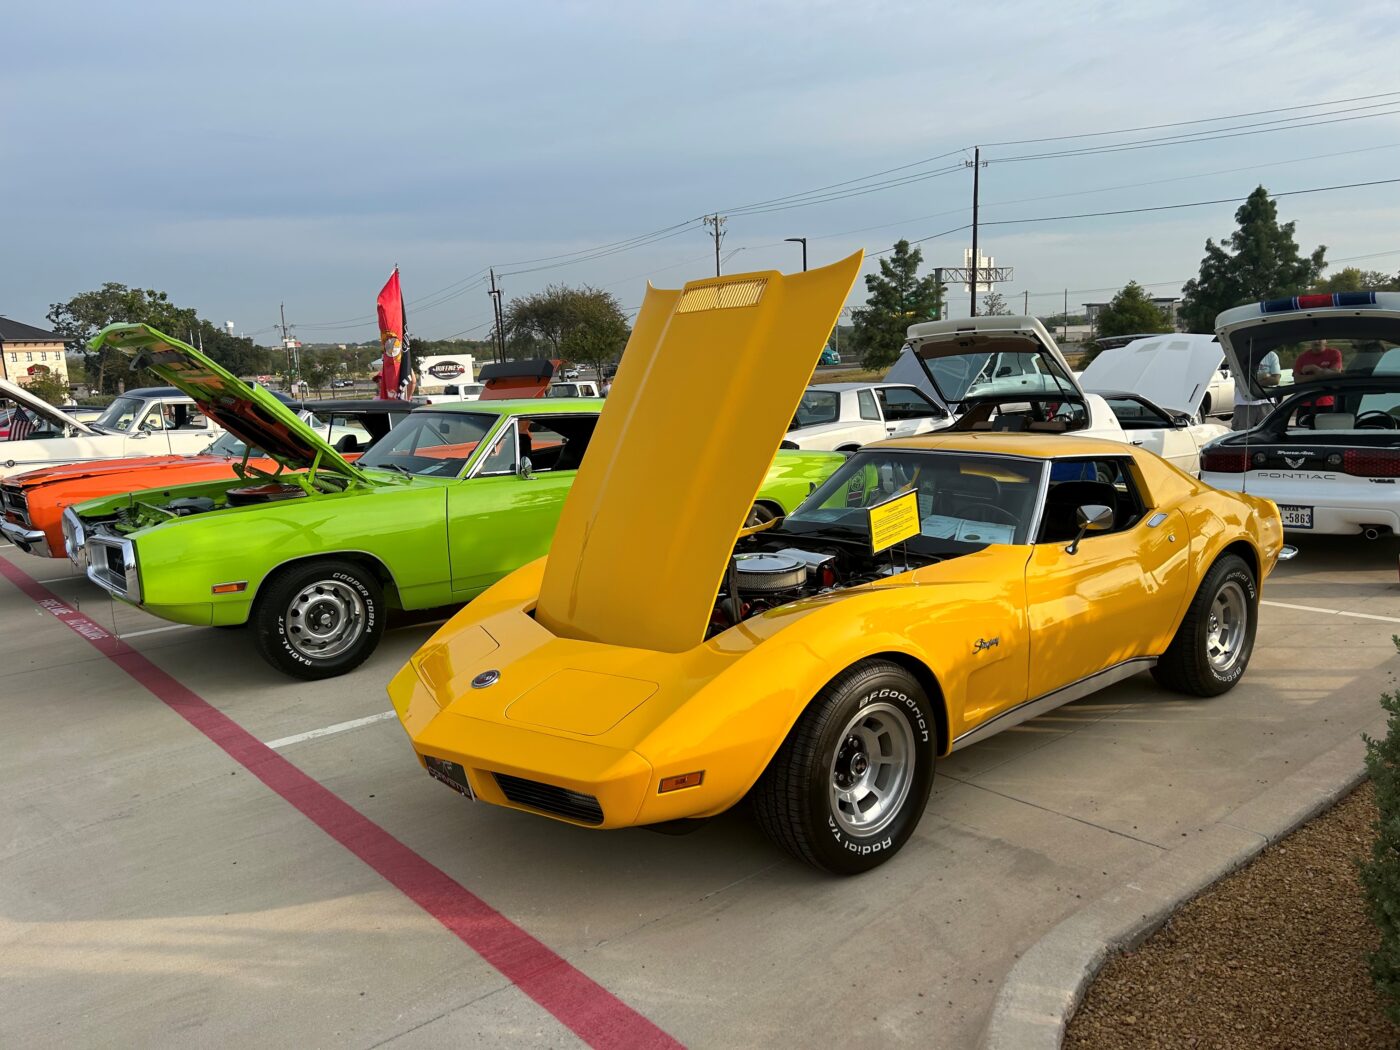 Car Show Revs Up Support for FPH Caring Fund